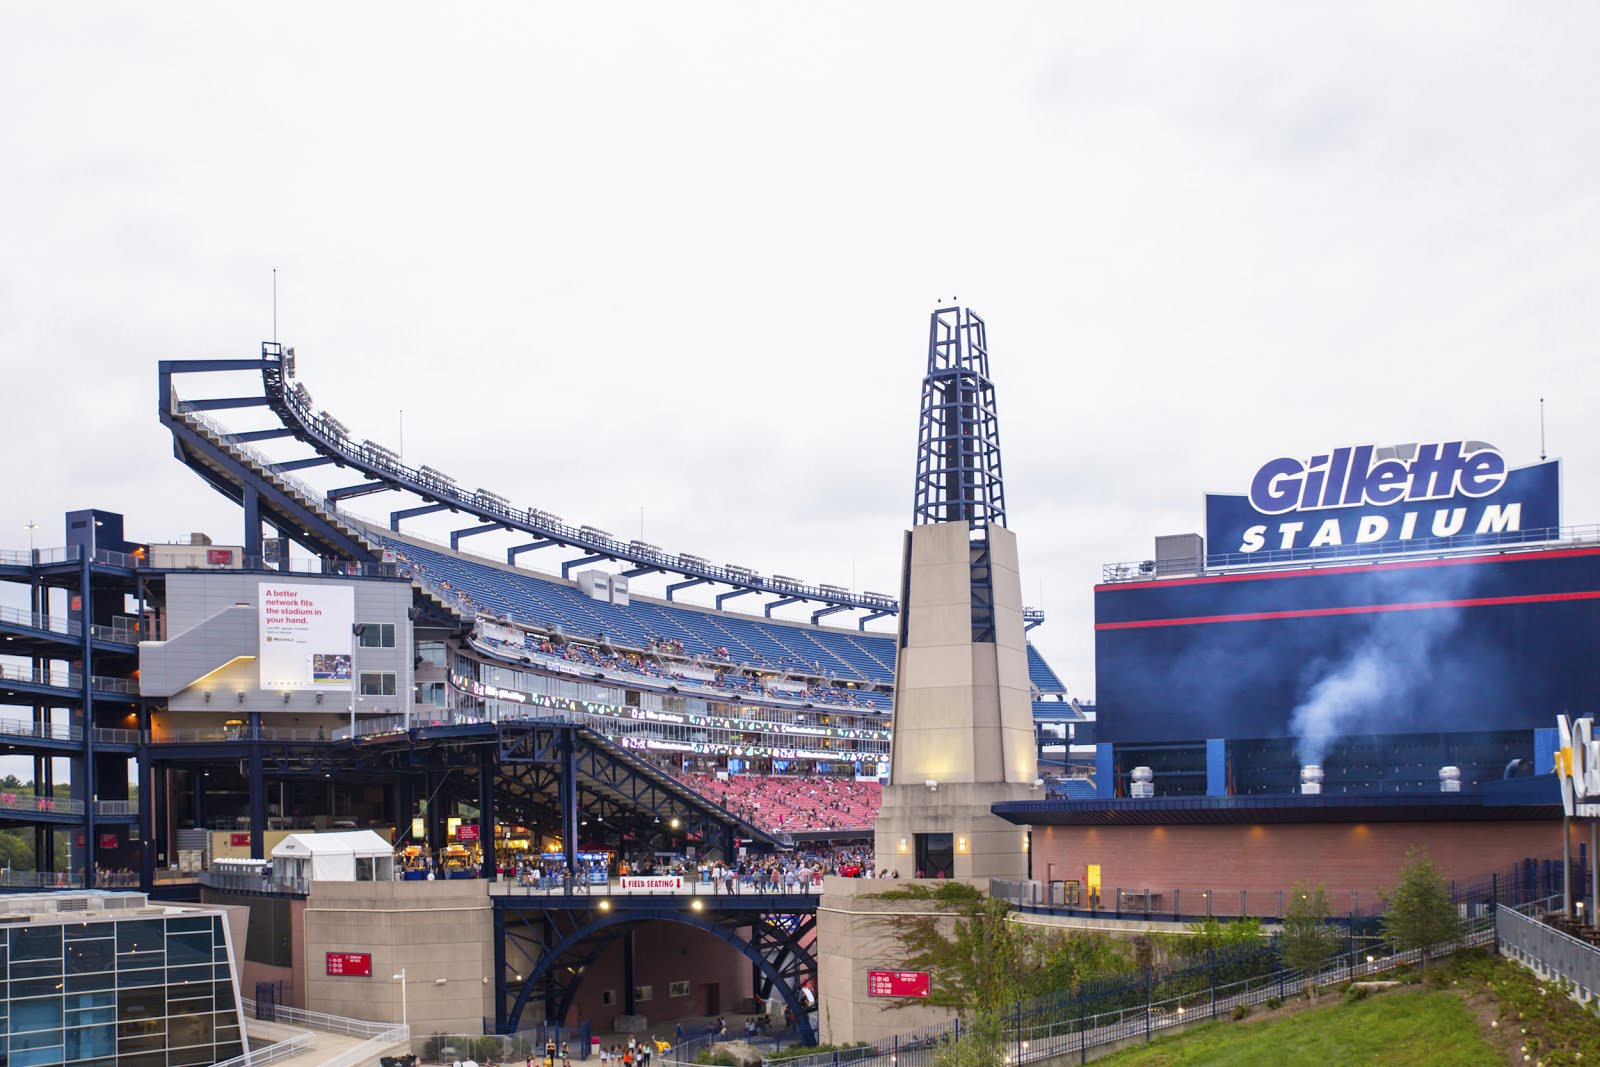 Sports Stadium Tickets Visit Gillette Stadium to Attend a Game or Concert